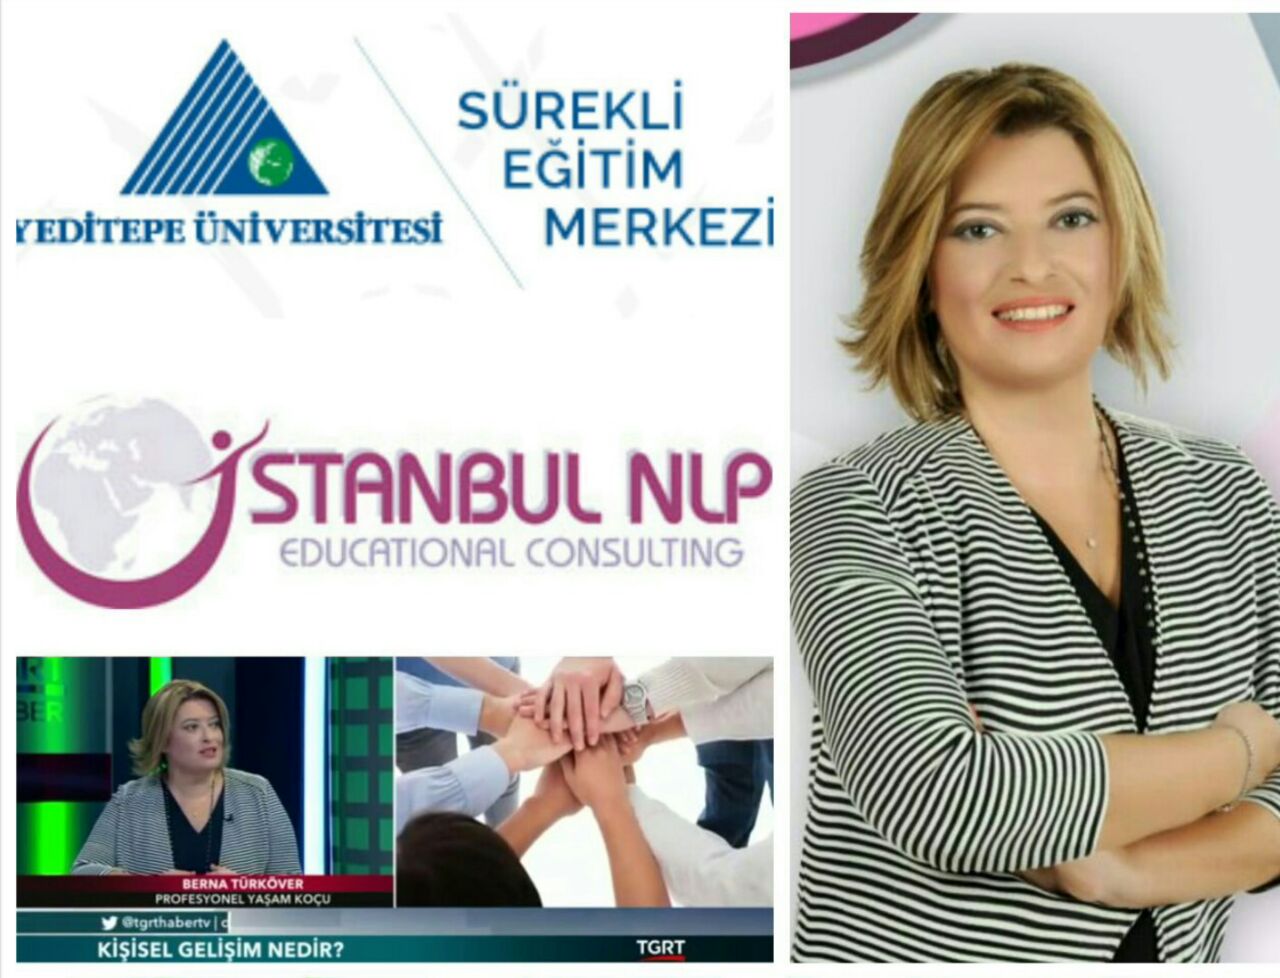 Coaching Training with Berna TÜRKÖVER in cooperation with İstanbul NLP